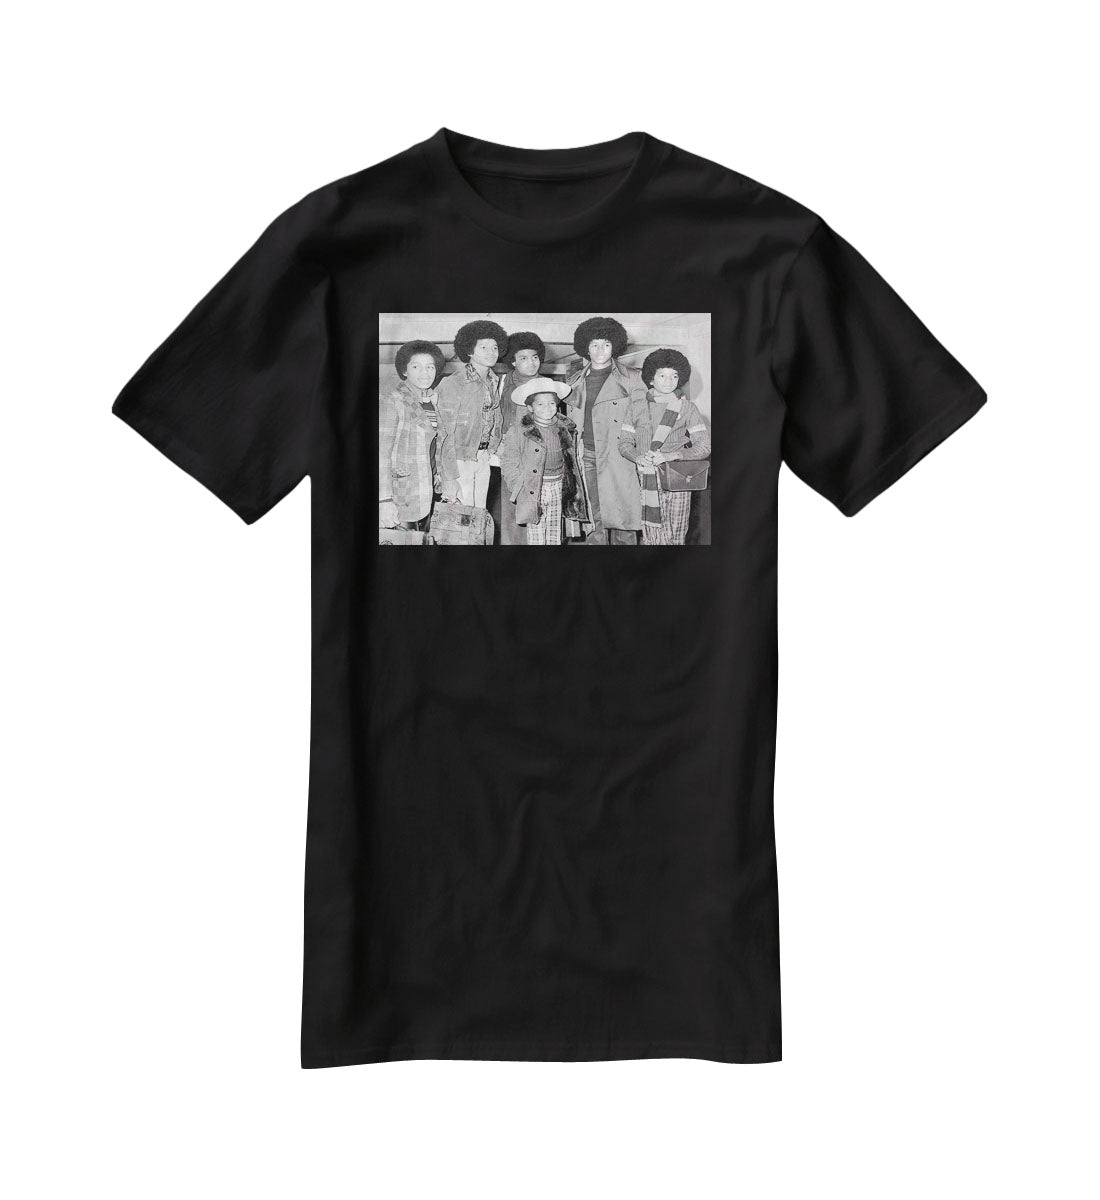 The Jackson Five Marlon Jackie Tito Jermaine Michael and in front 9 year old Randy T-Shirt - Canvas Art Rocks - 1